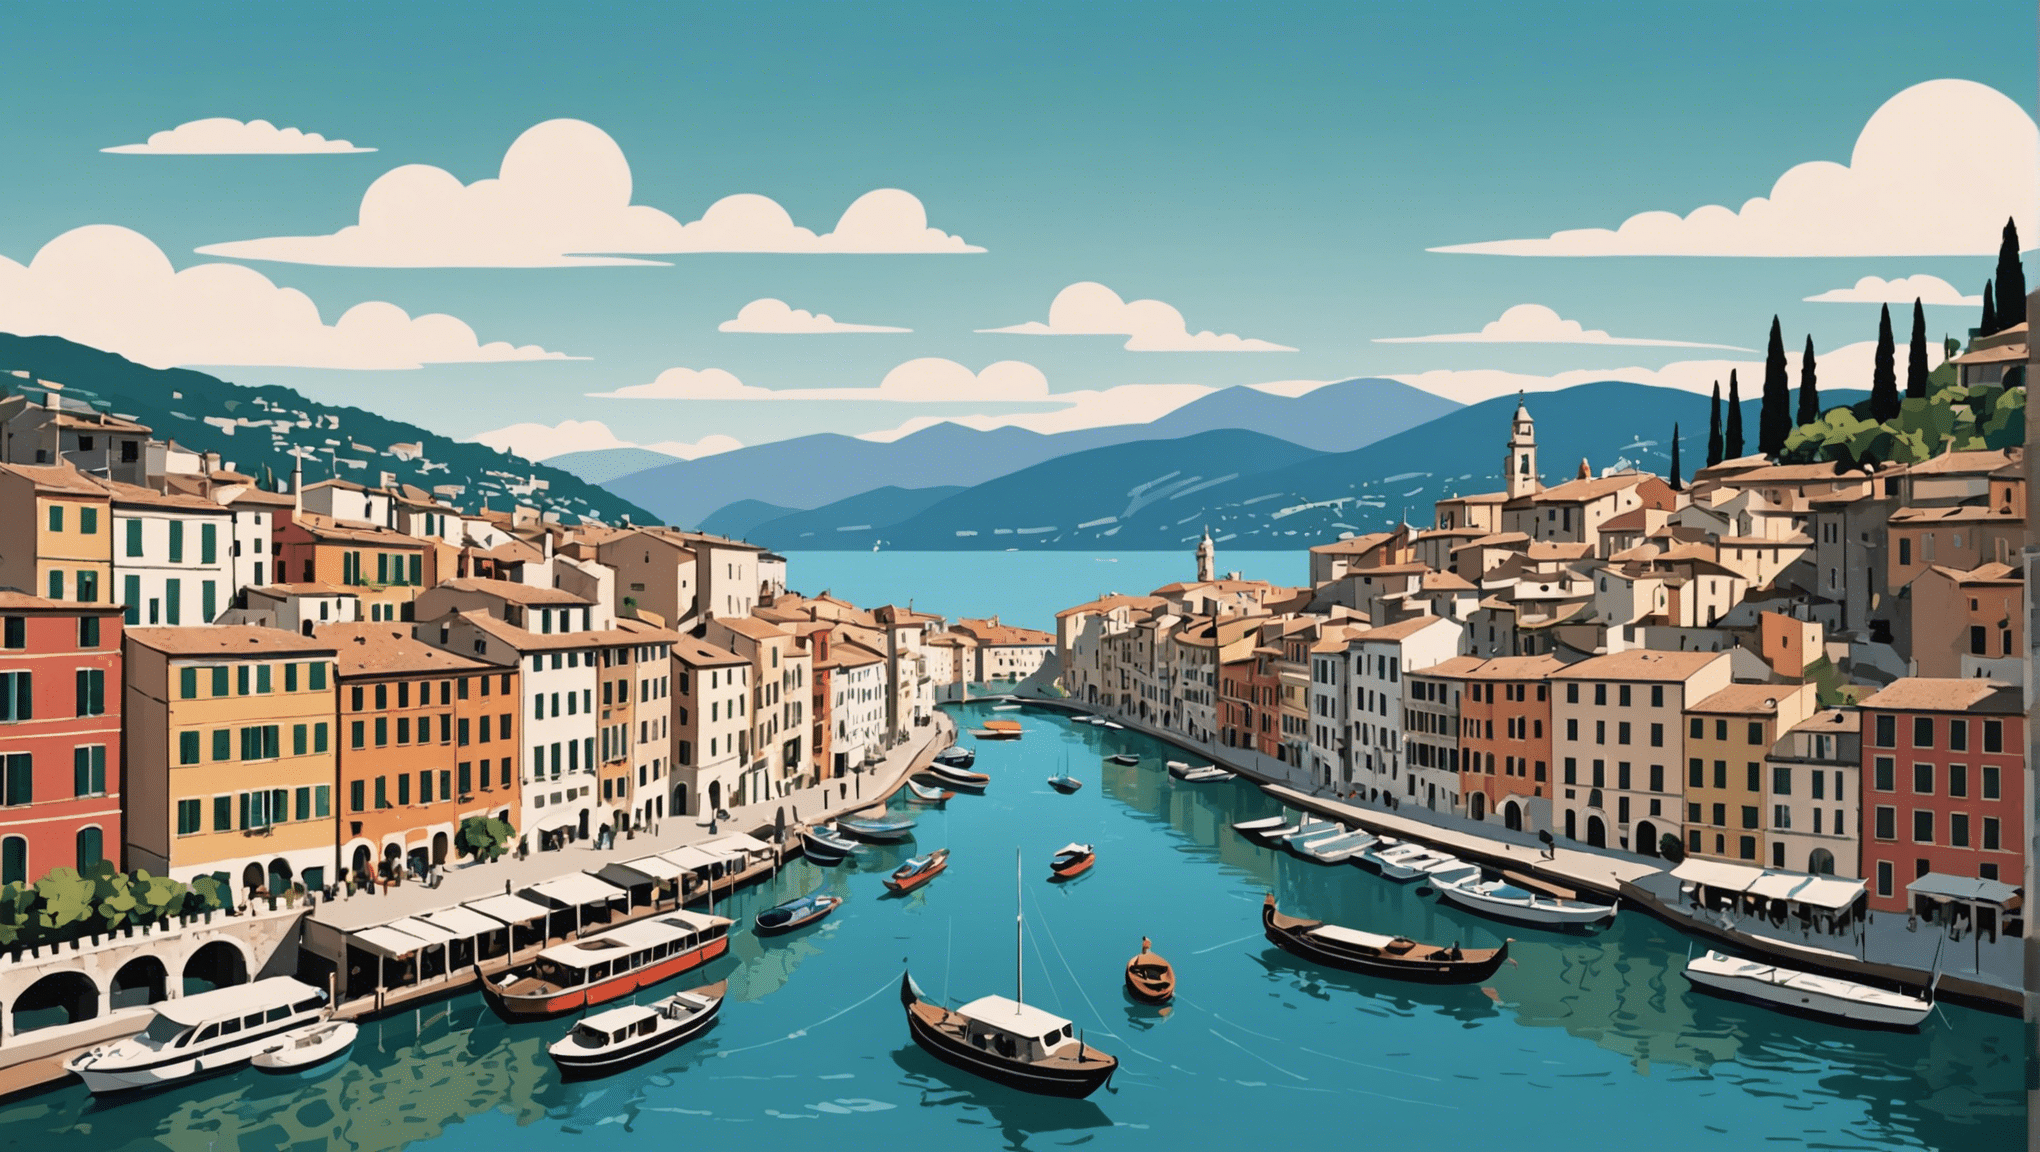 discover the essentials for an unforgettable trip to Italy: artistic treasures, gastronomy, culture and breathtaking landscapes.